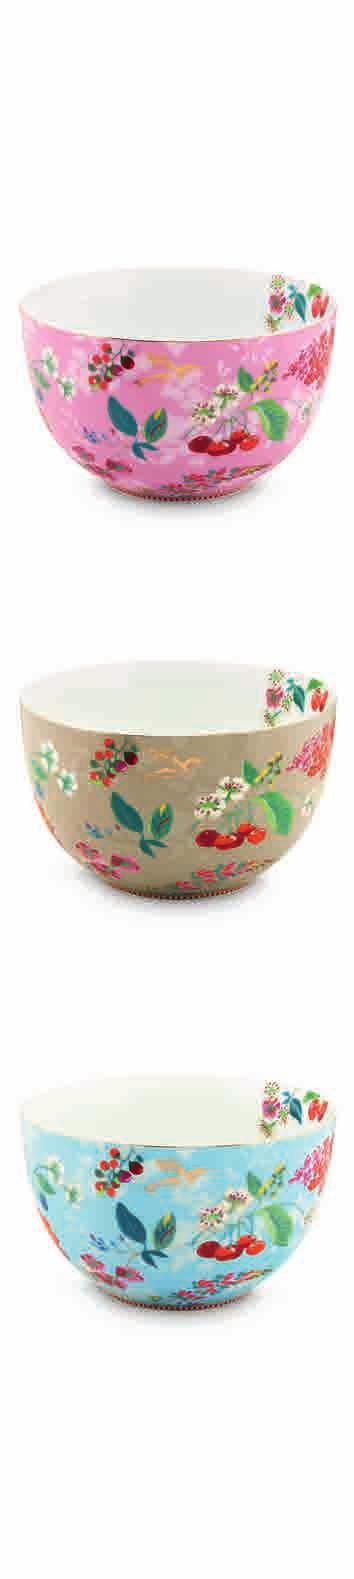 51.011.010 Egg Cup Lovely Branches Pink 6/48 51.003.092 Bowl Bloomingtails Pink Ø 9,5 cm - 6/48 51.003.089 Bowl Cherry Pink Ø 12 cm - 6/36 51.003.007 Bowl Early Bird Pink Ø 15 cm - 6/24 51.003.086 Bowl Rose Pink Ø 18 cm - 2/12 51.